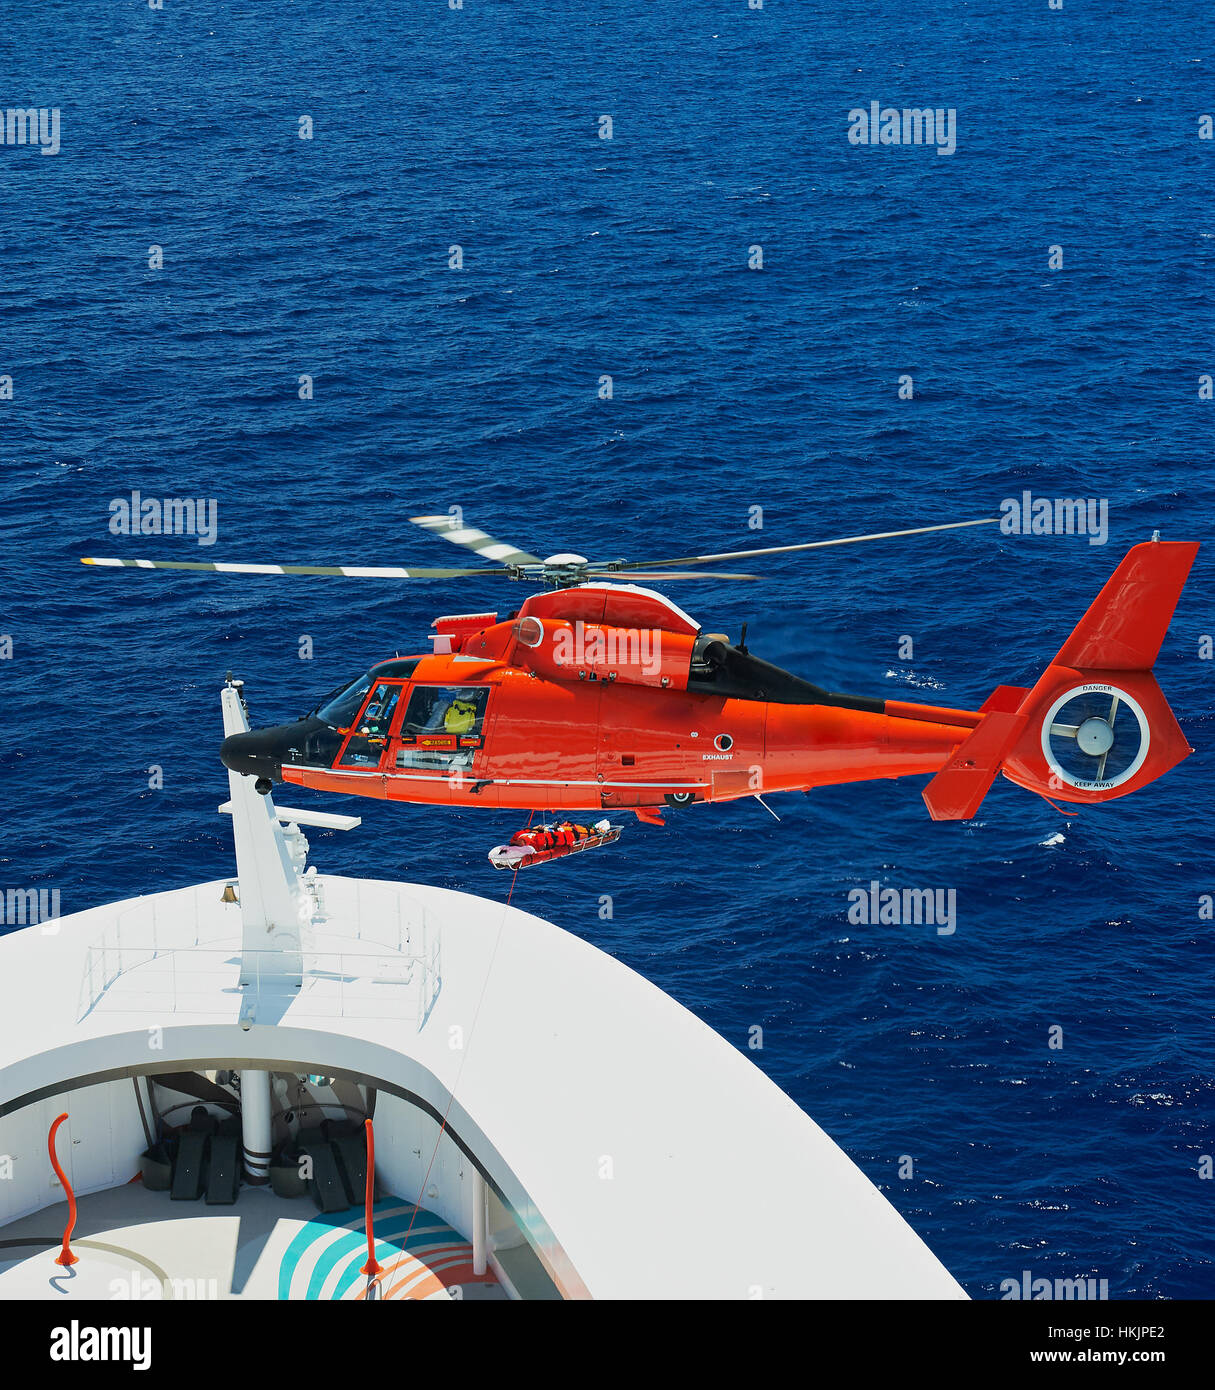 lifting person on rescue helicopter from ship at sea Stock Photo